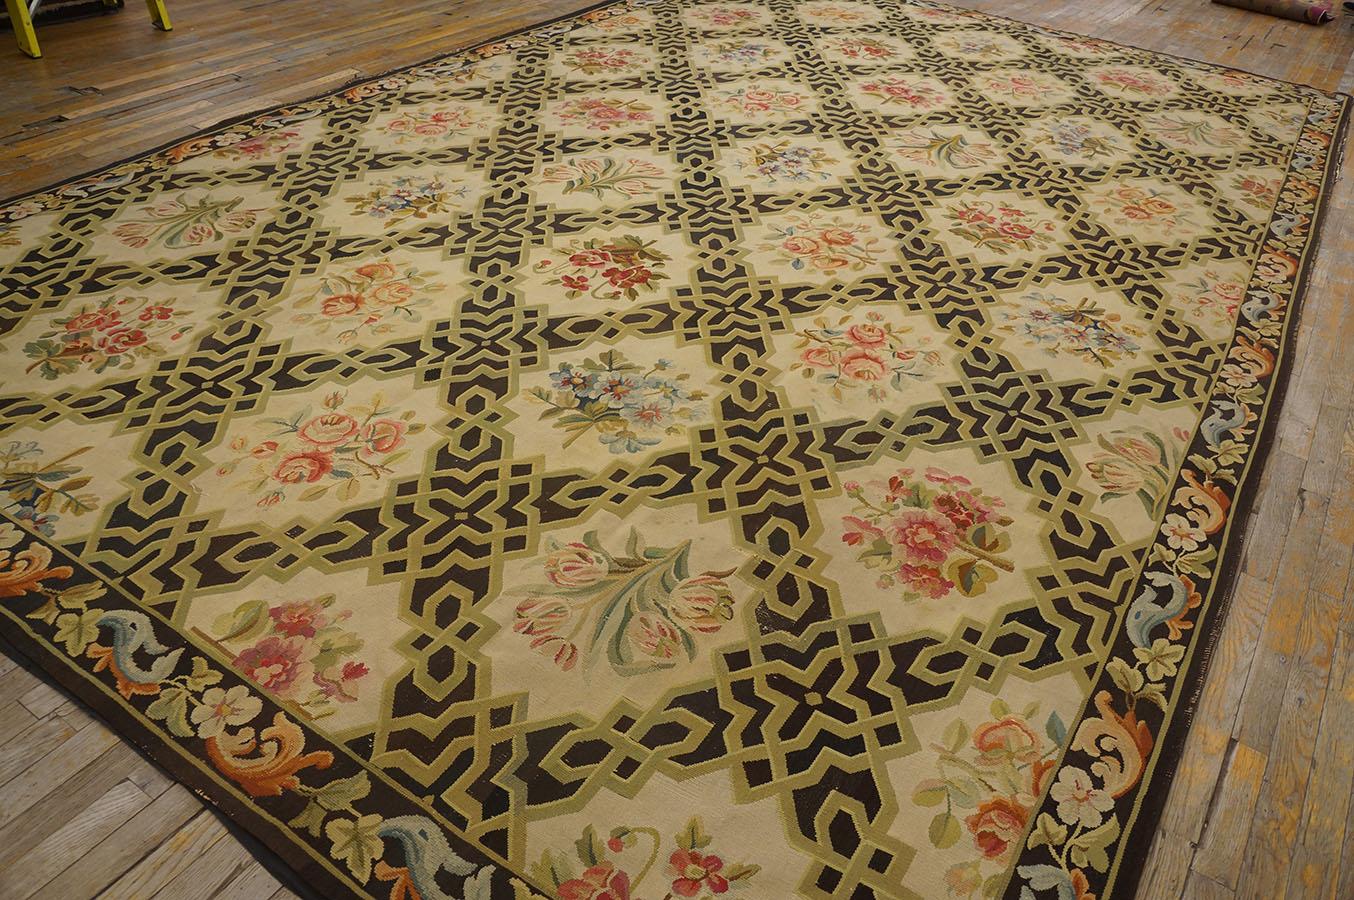 Early 20th Century French Aubusson Carpet ( 9' 8'' x 15' 3'' - 295 x 465 cm ) For Sale 4